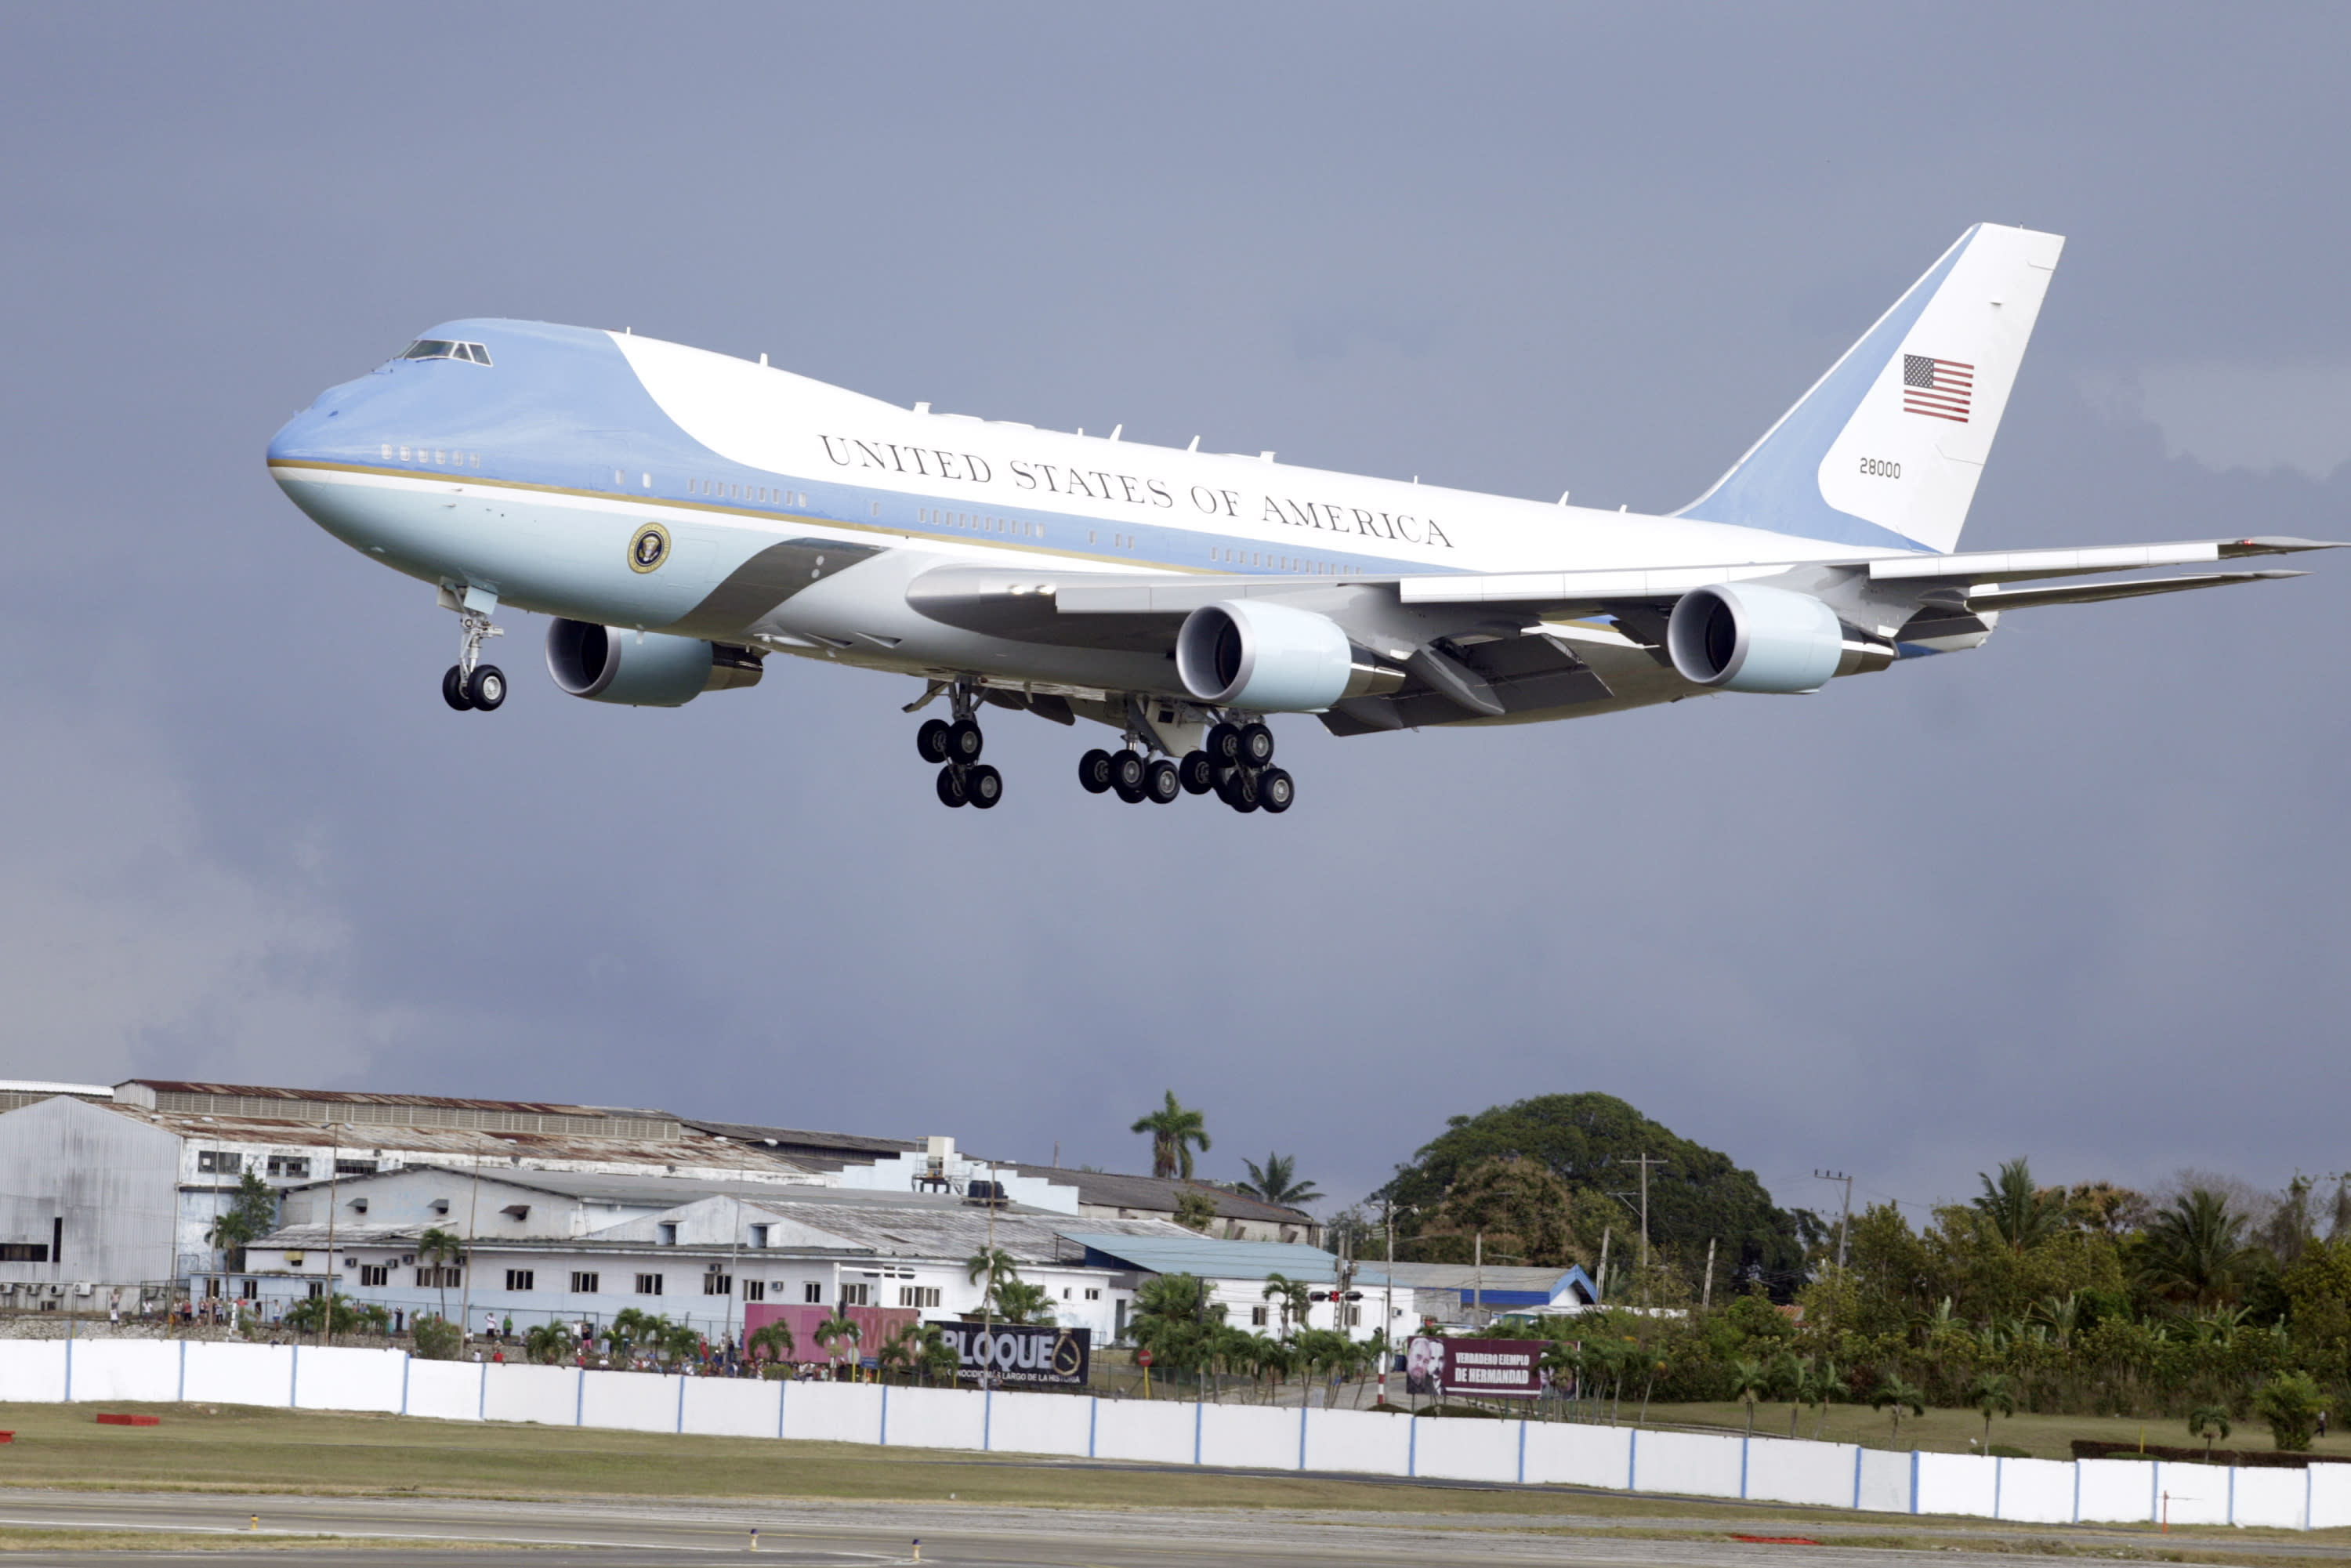 Congress May Thwart Decorator In Chief Trump On Design For Air Force One